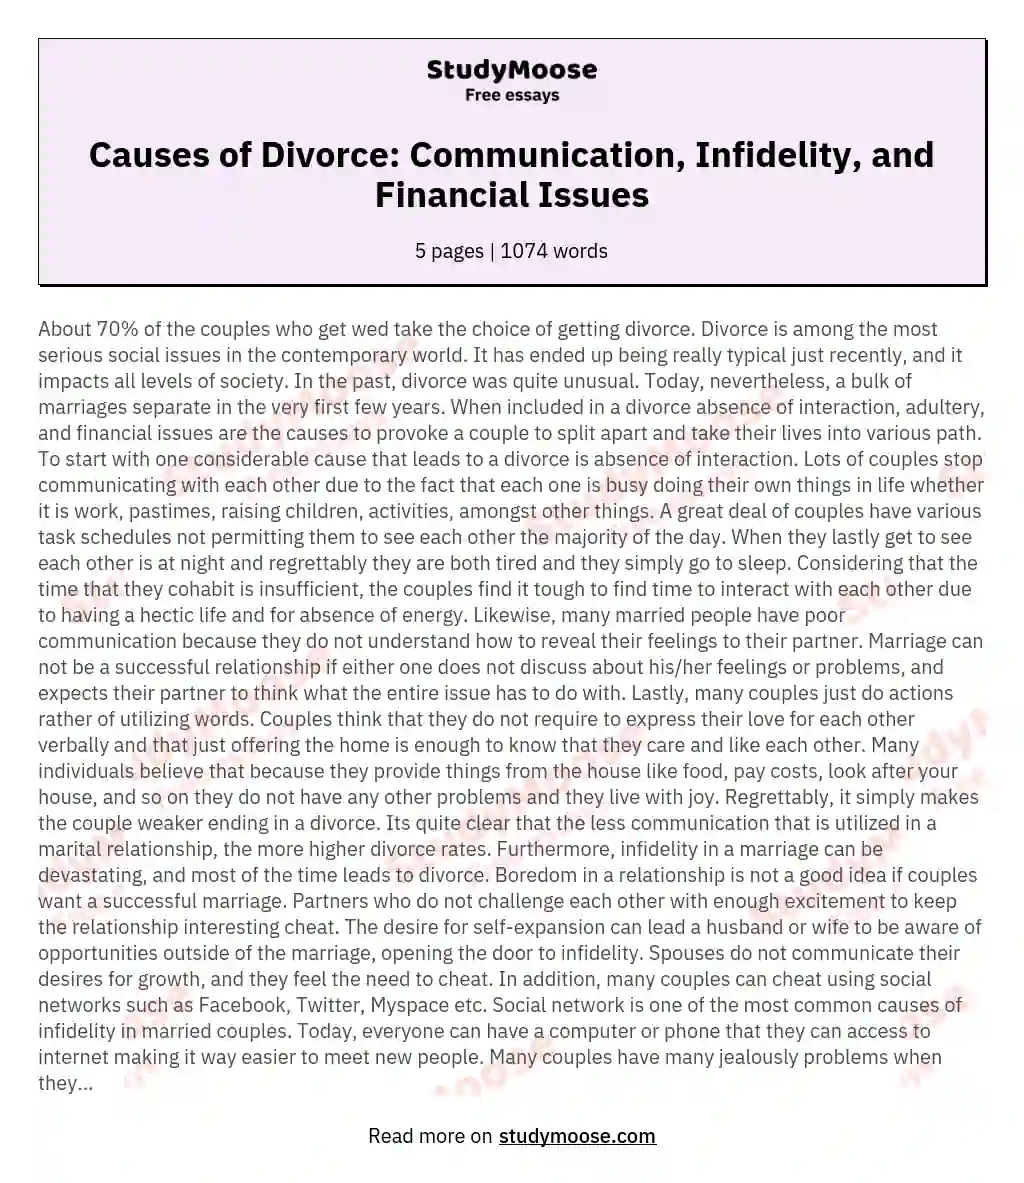 Causes of Divorce: Communication, Infidelity, and Financial Issues